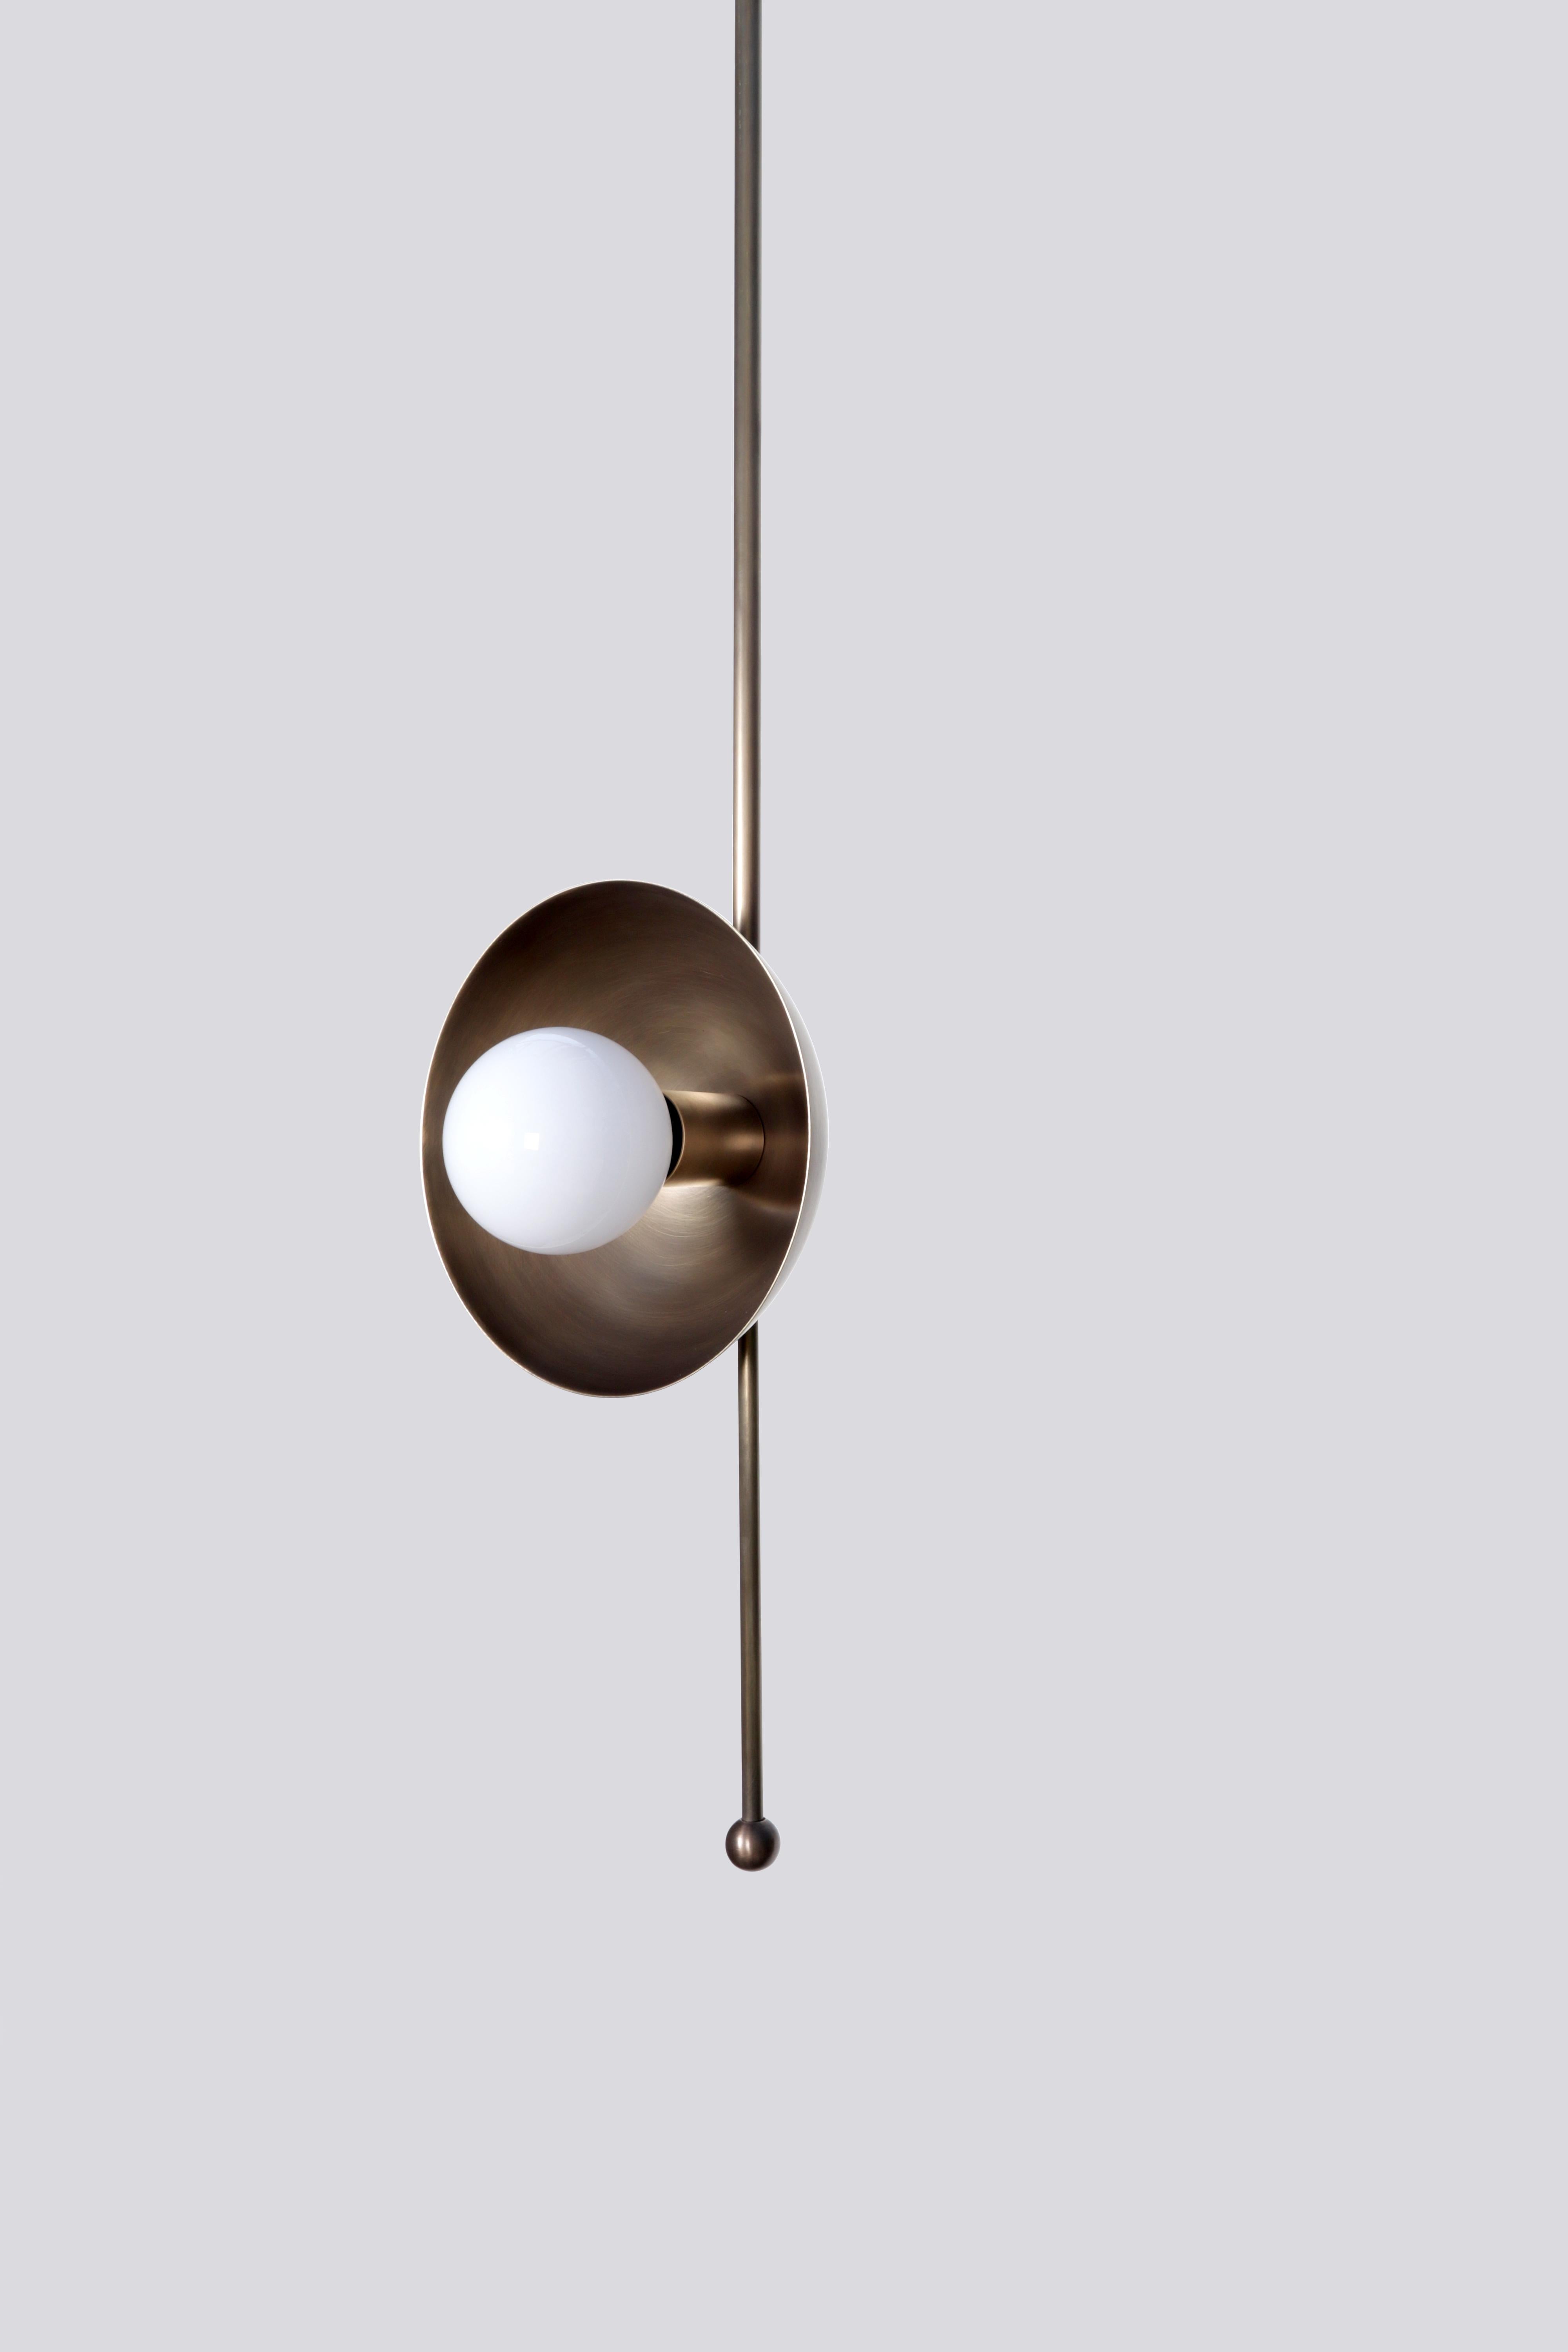 Drop 1 Brass Dome Pendant Lamp by Lamp Shaper
Dimensions: D 23 x W 24 x H 114.5 cm.
Materials: Brass.

Different finishes available: raw brass, aged brass, burnt brass and brushed brass Please contact us.

All our lamps can be wired according to